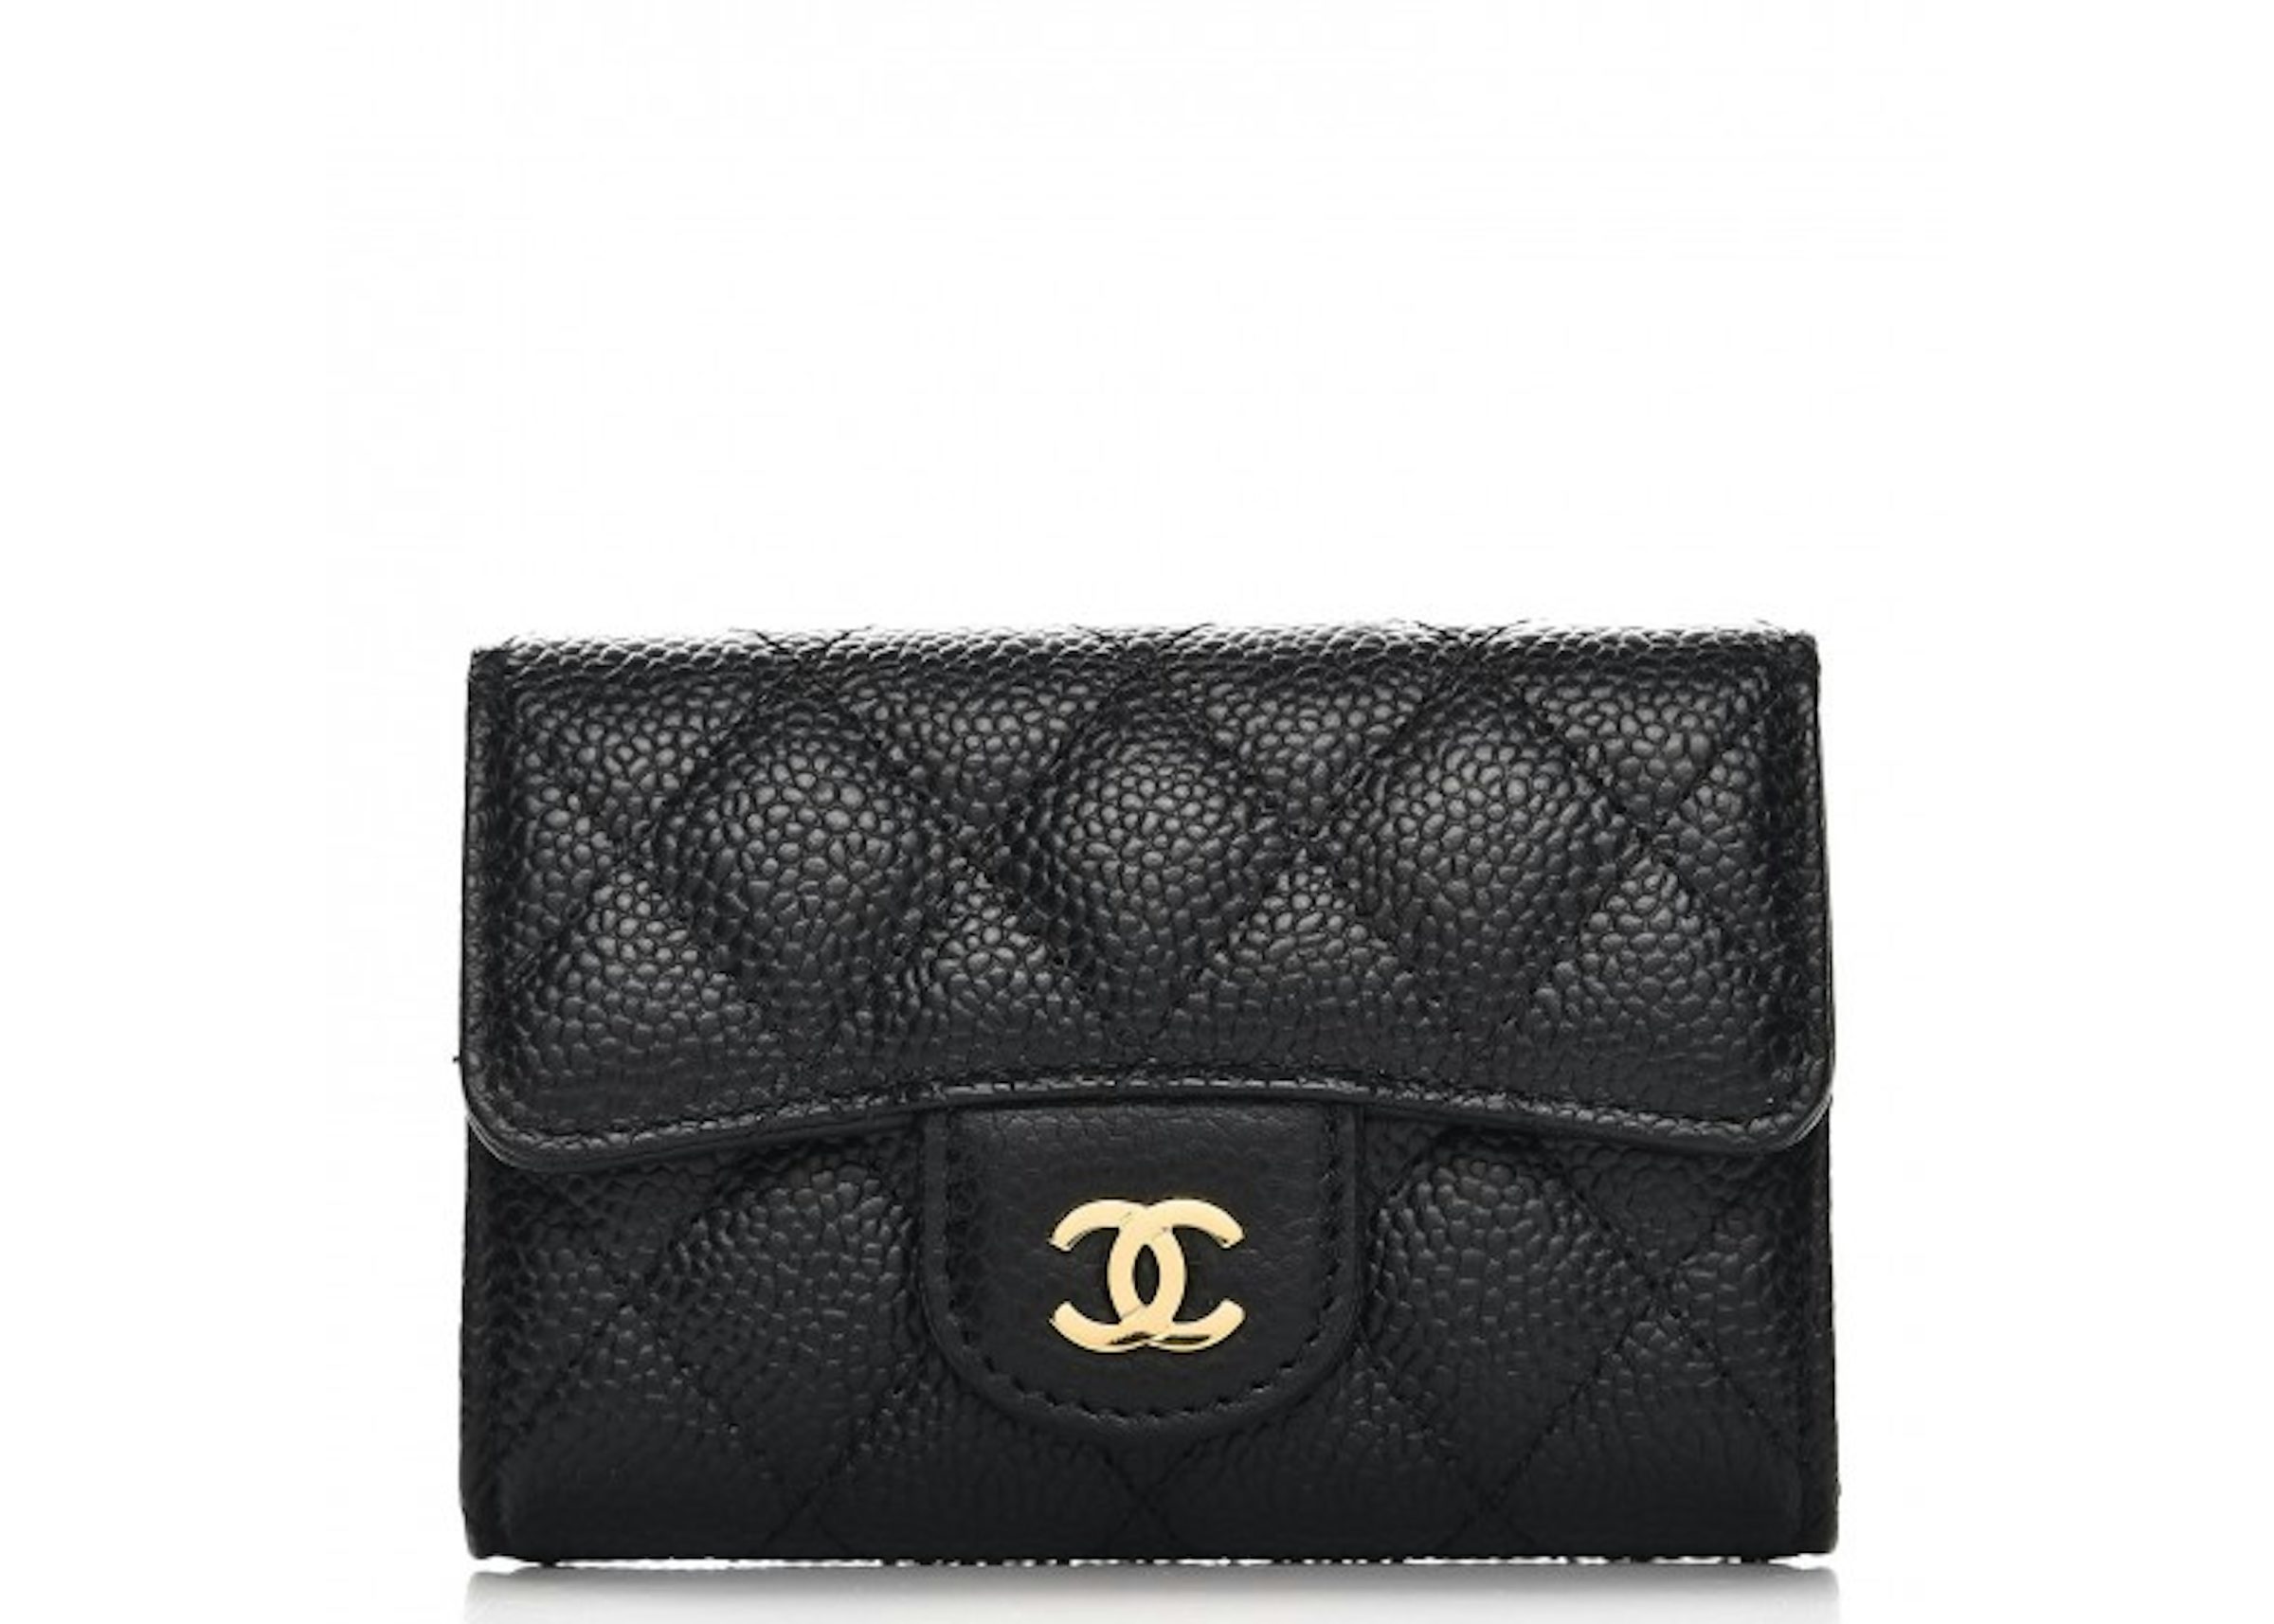 chanel fold over clutch